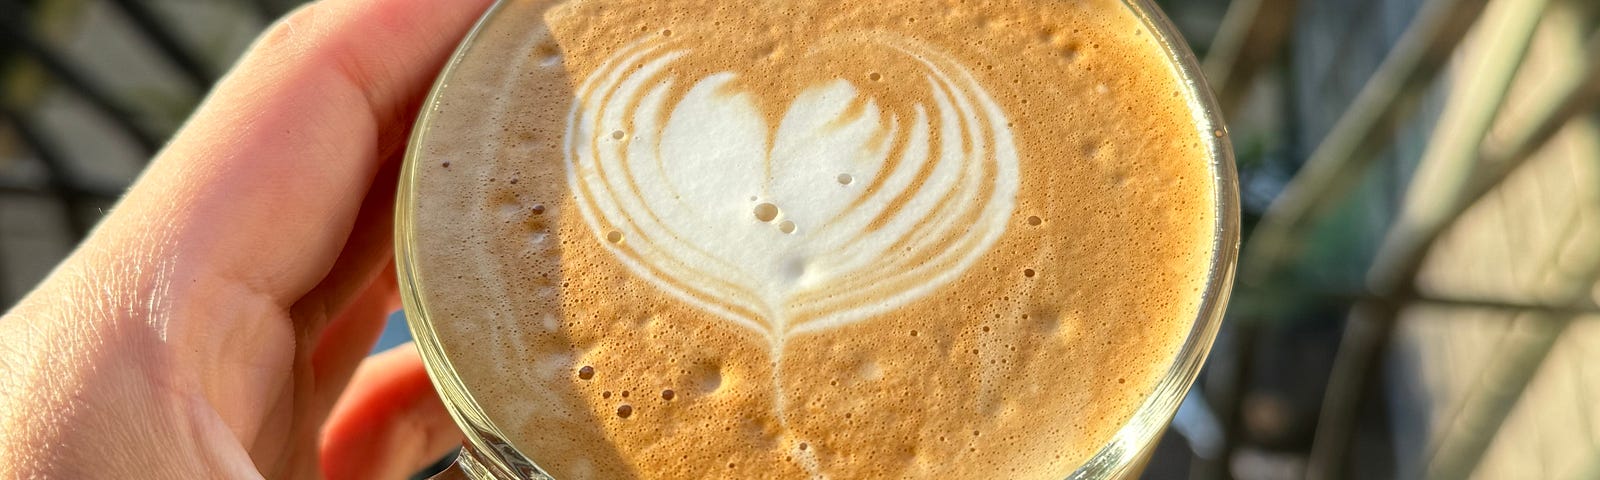 Hand holding a cup of coffee with heart-shape latte art, sun shining, over a garden view from a Juliette balcony.